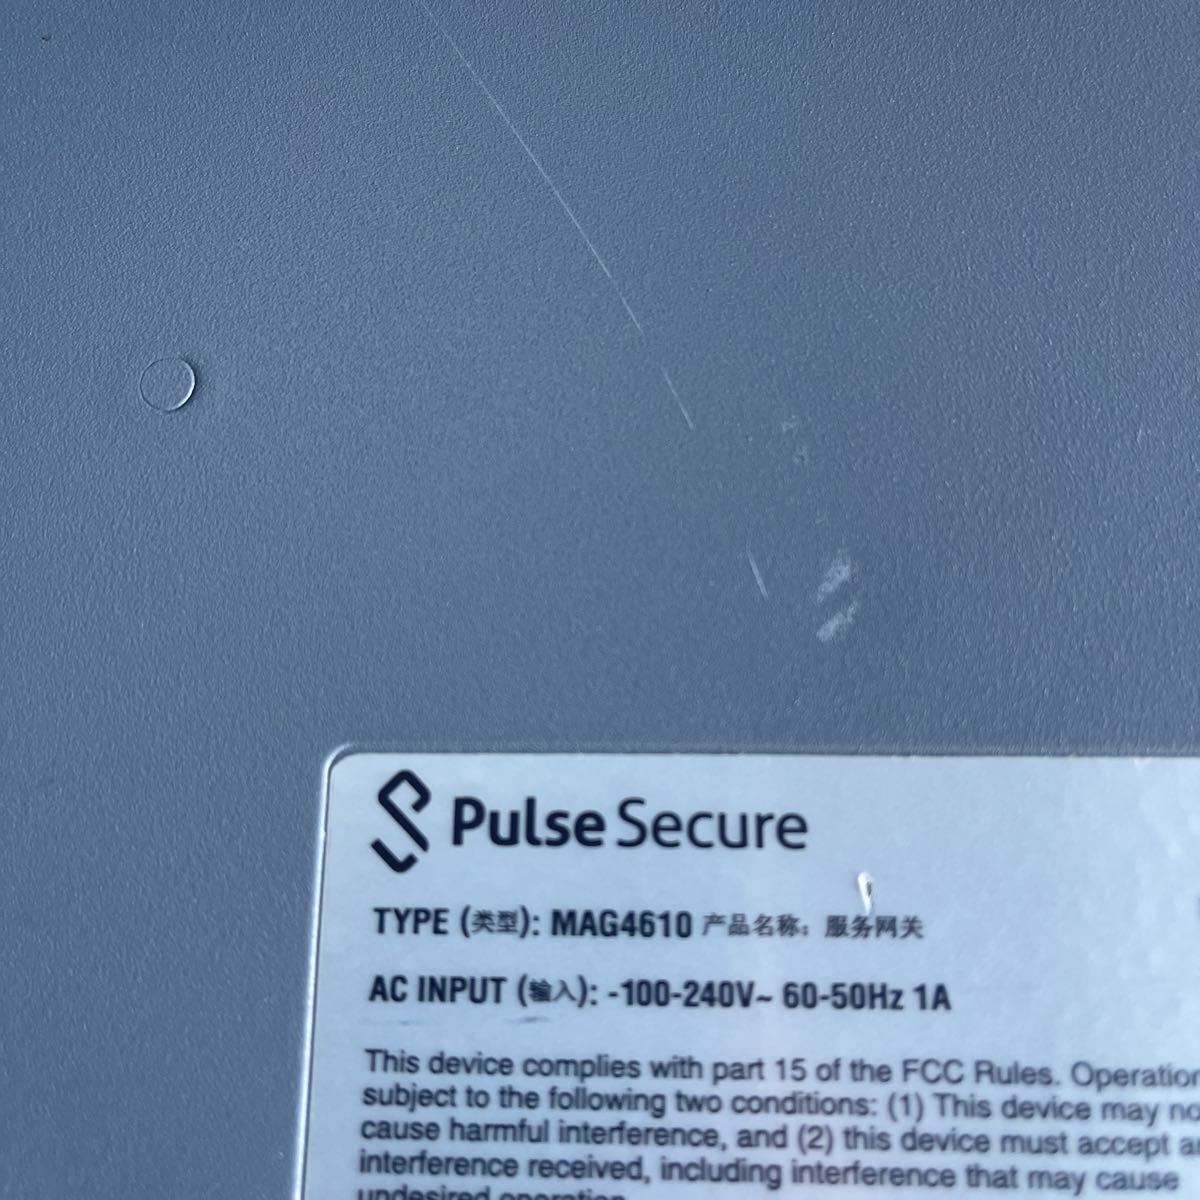 [D221]PULSE SECURE MAG4610 electrification verification only present condition exhibition 